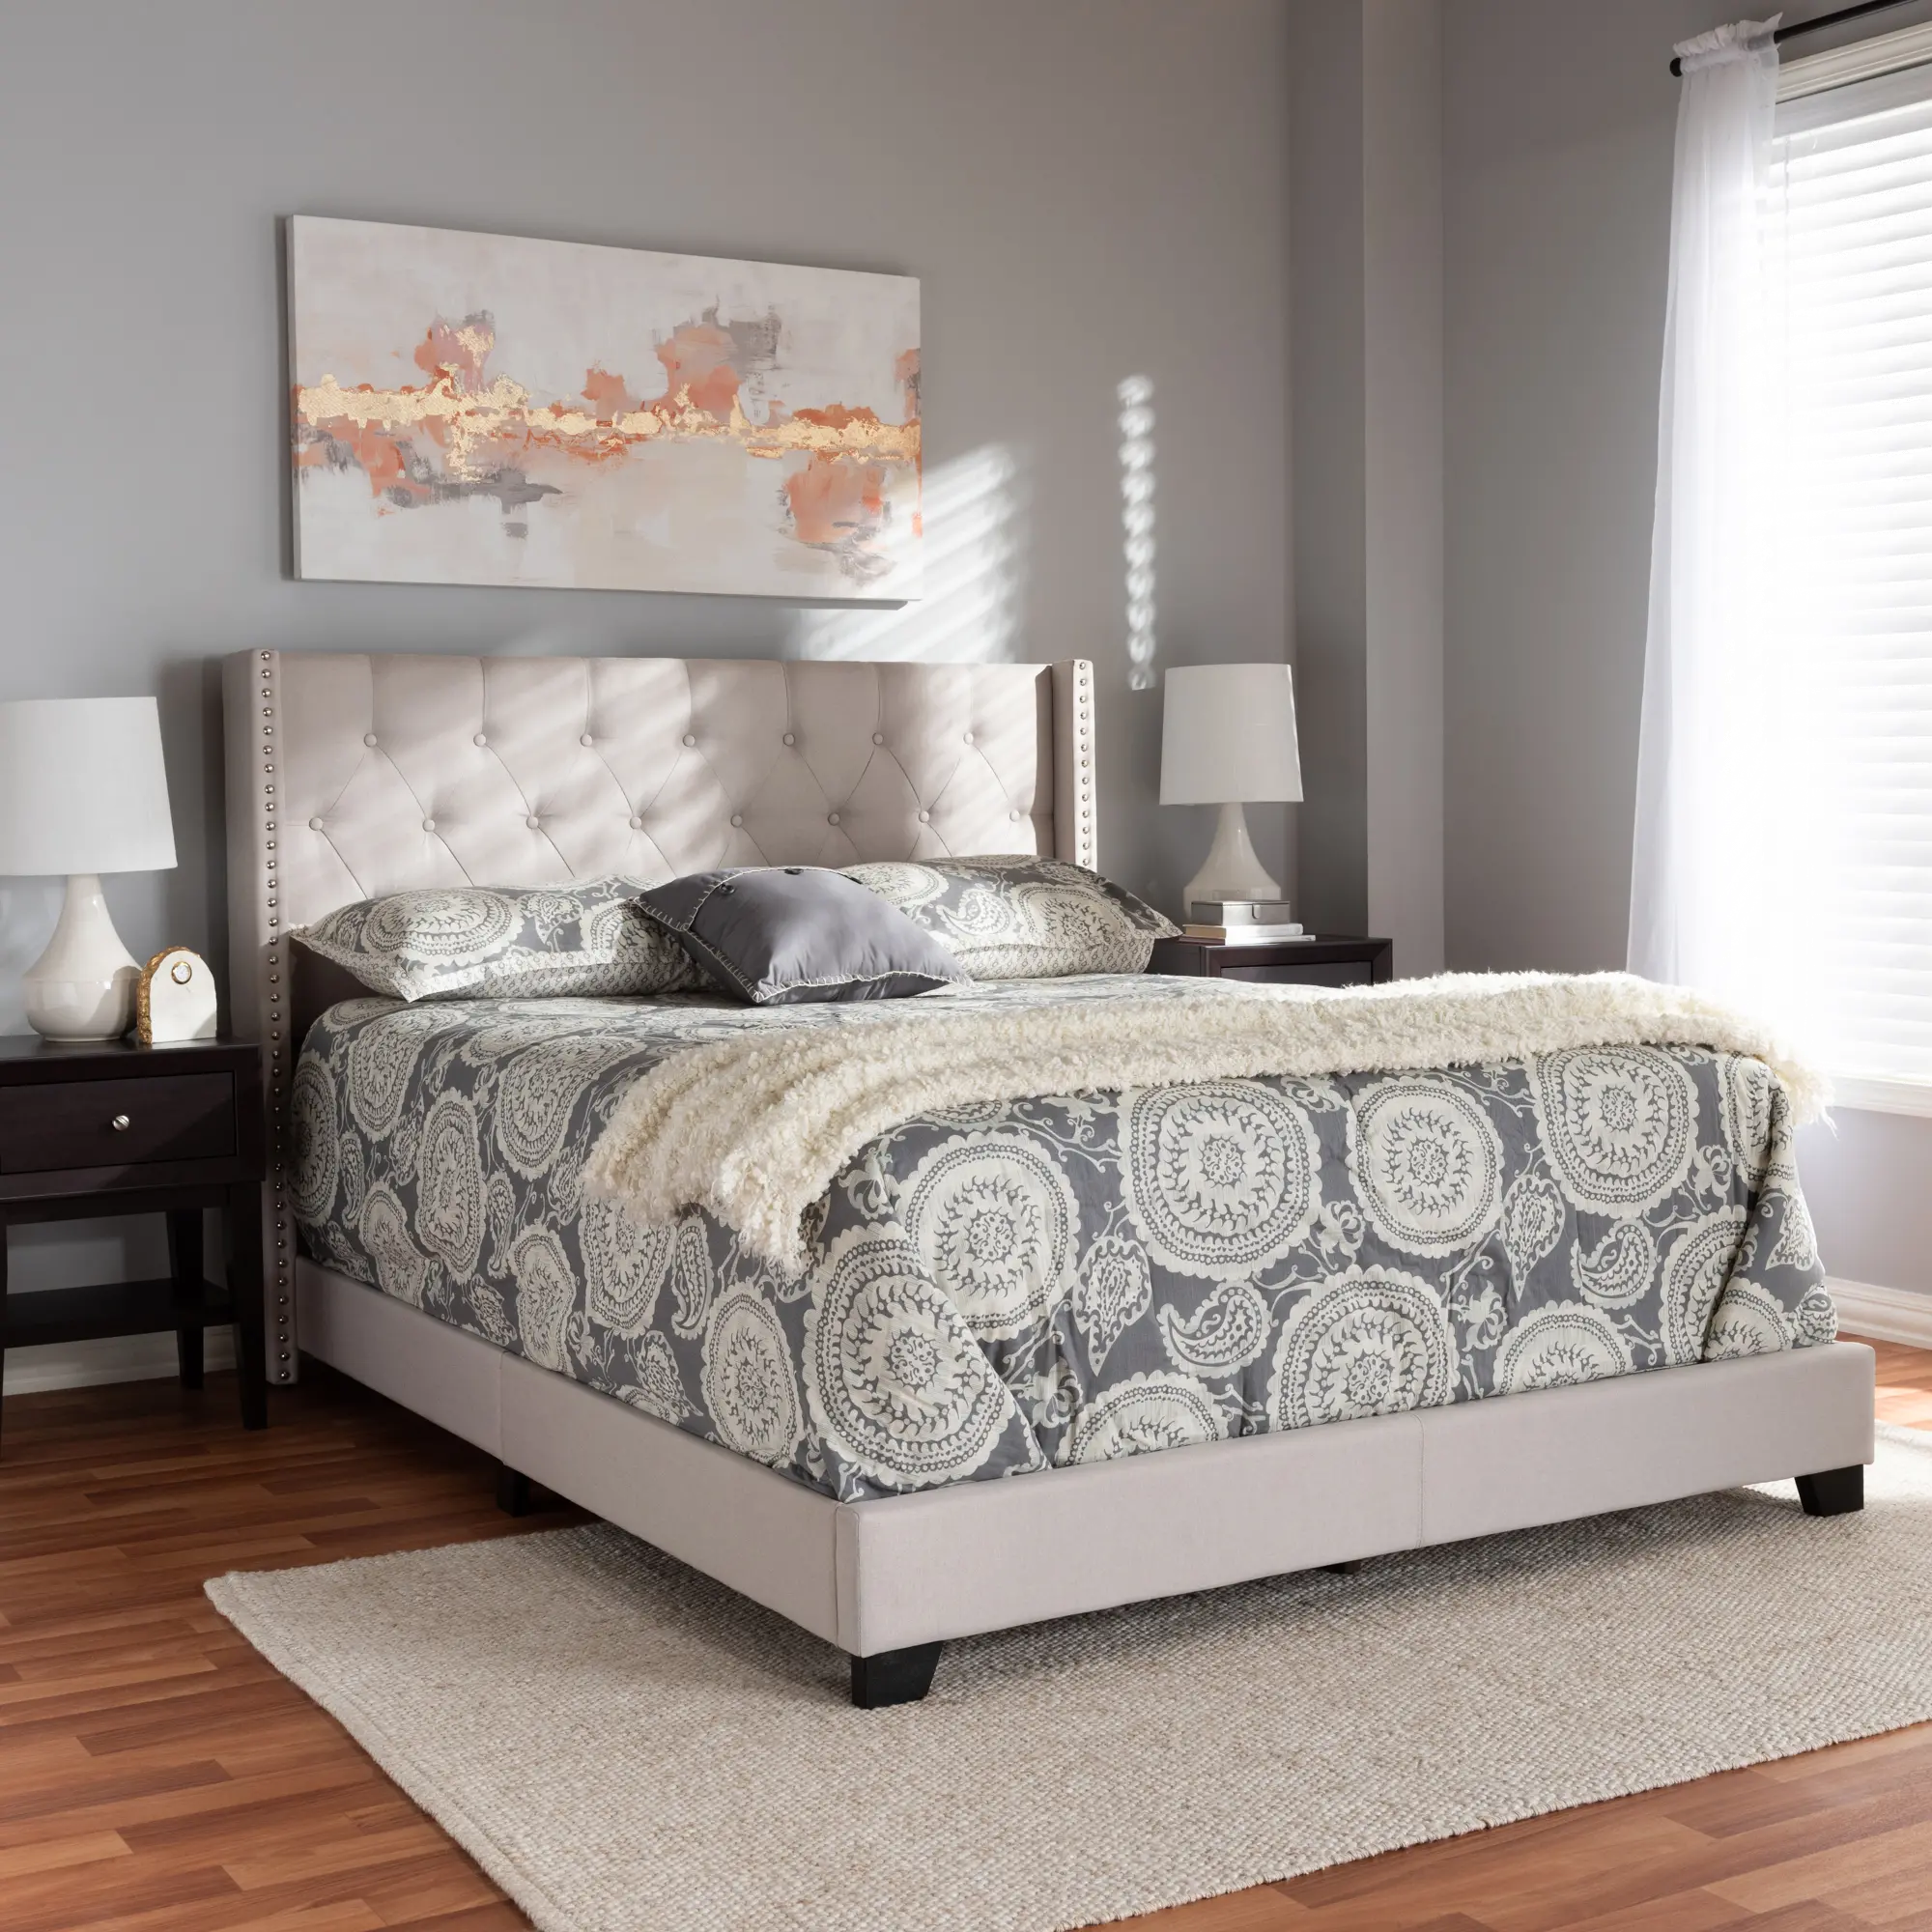 149-8946-RCW Contemporary Beige Upholstered King Bed - Westley sku 149-8946-RCW